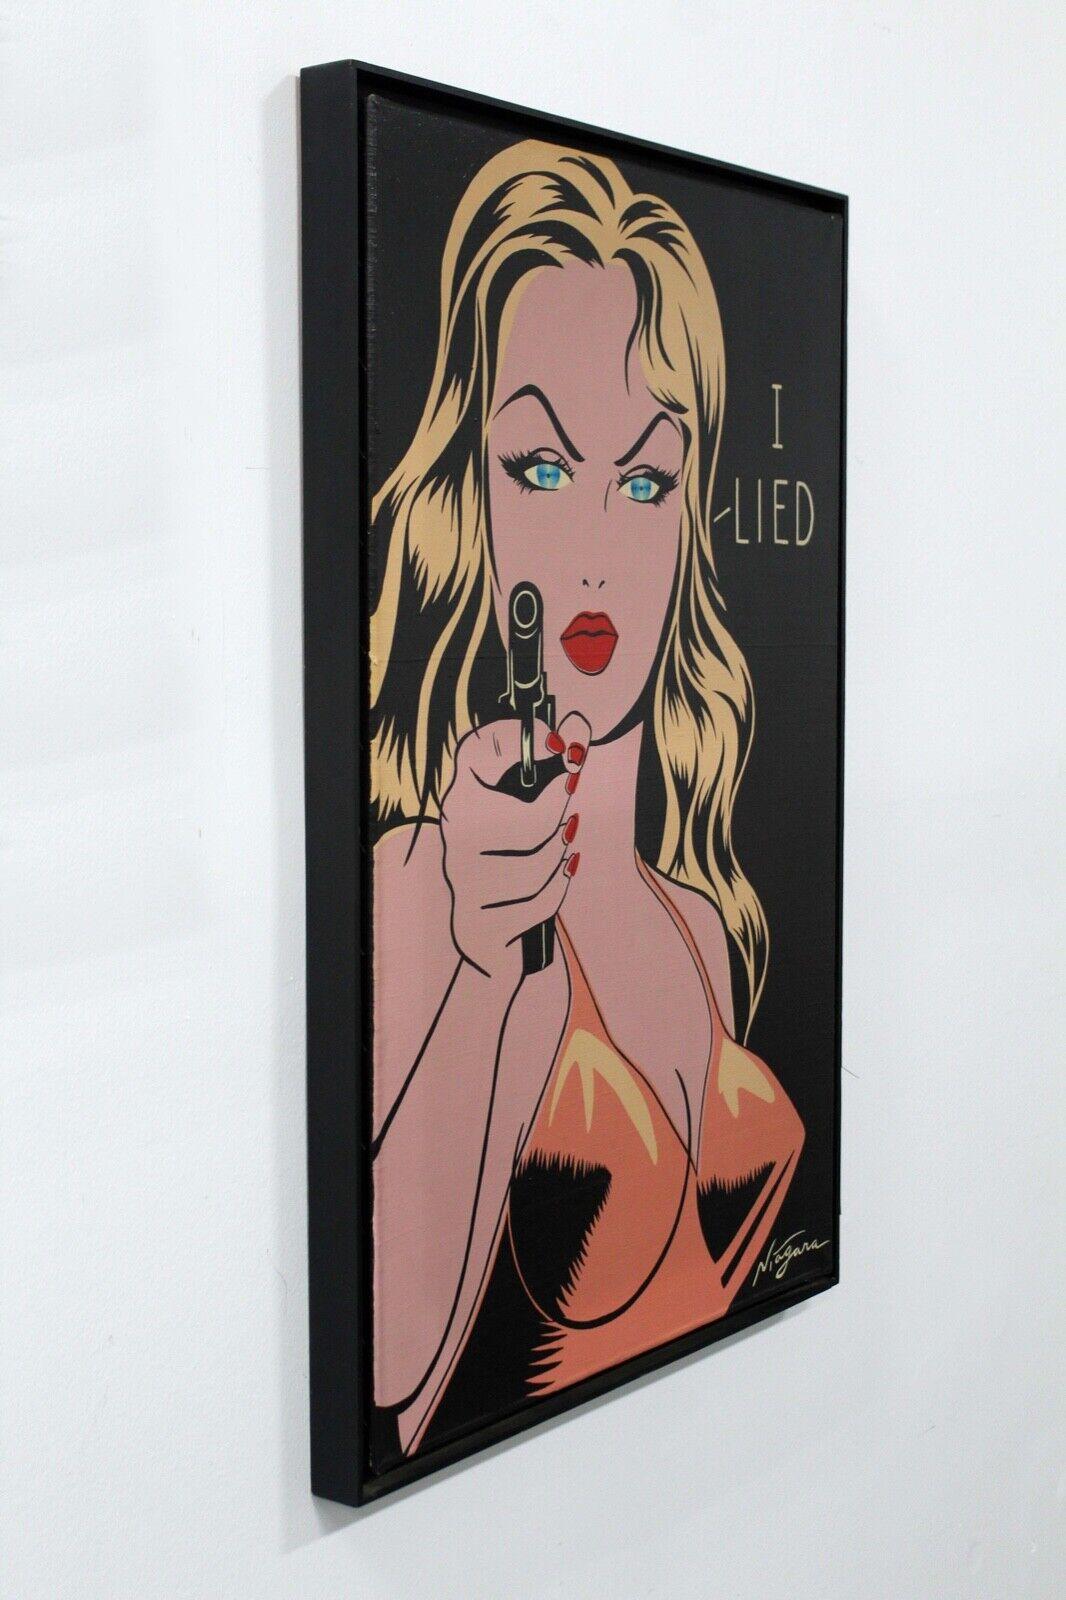 Le Shoppe Too in Michigan is offering this chic and sophisticated original acrylic painting on canvas titled 